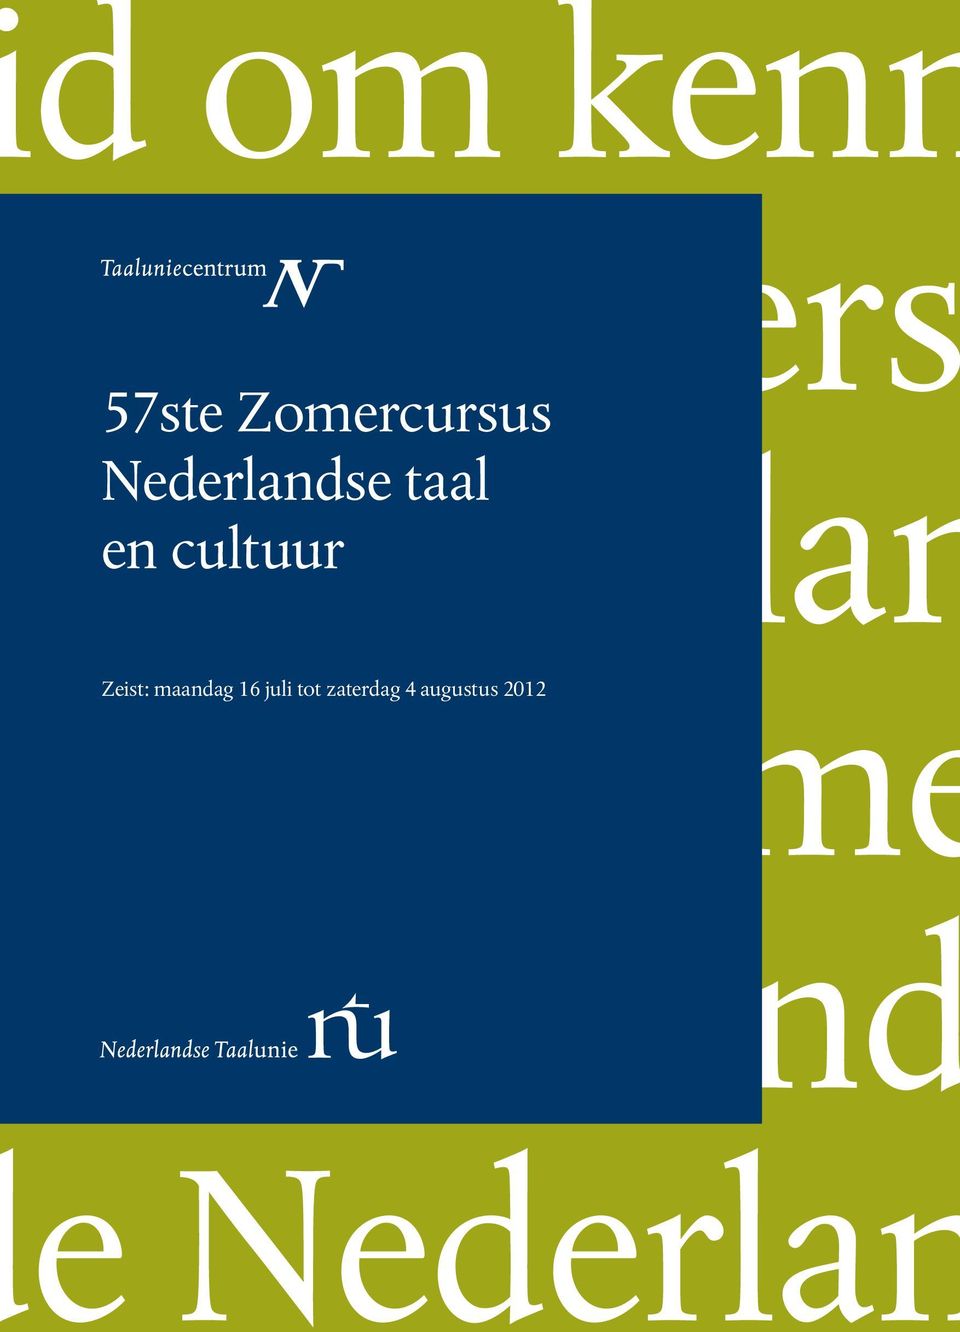 me iverse and e Nederlan Zeist: